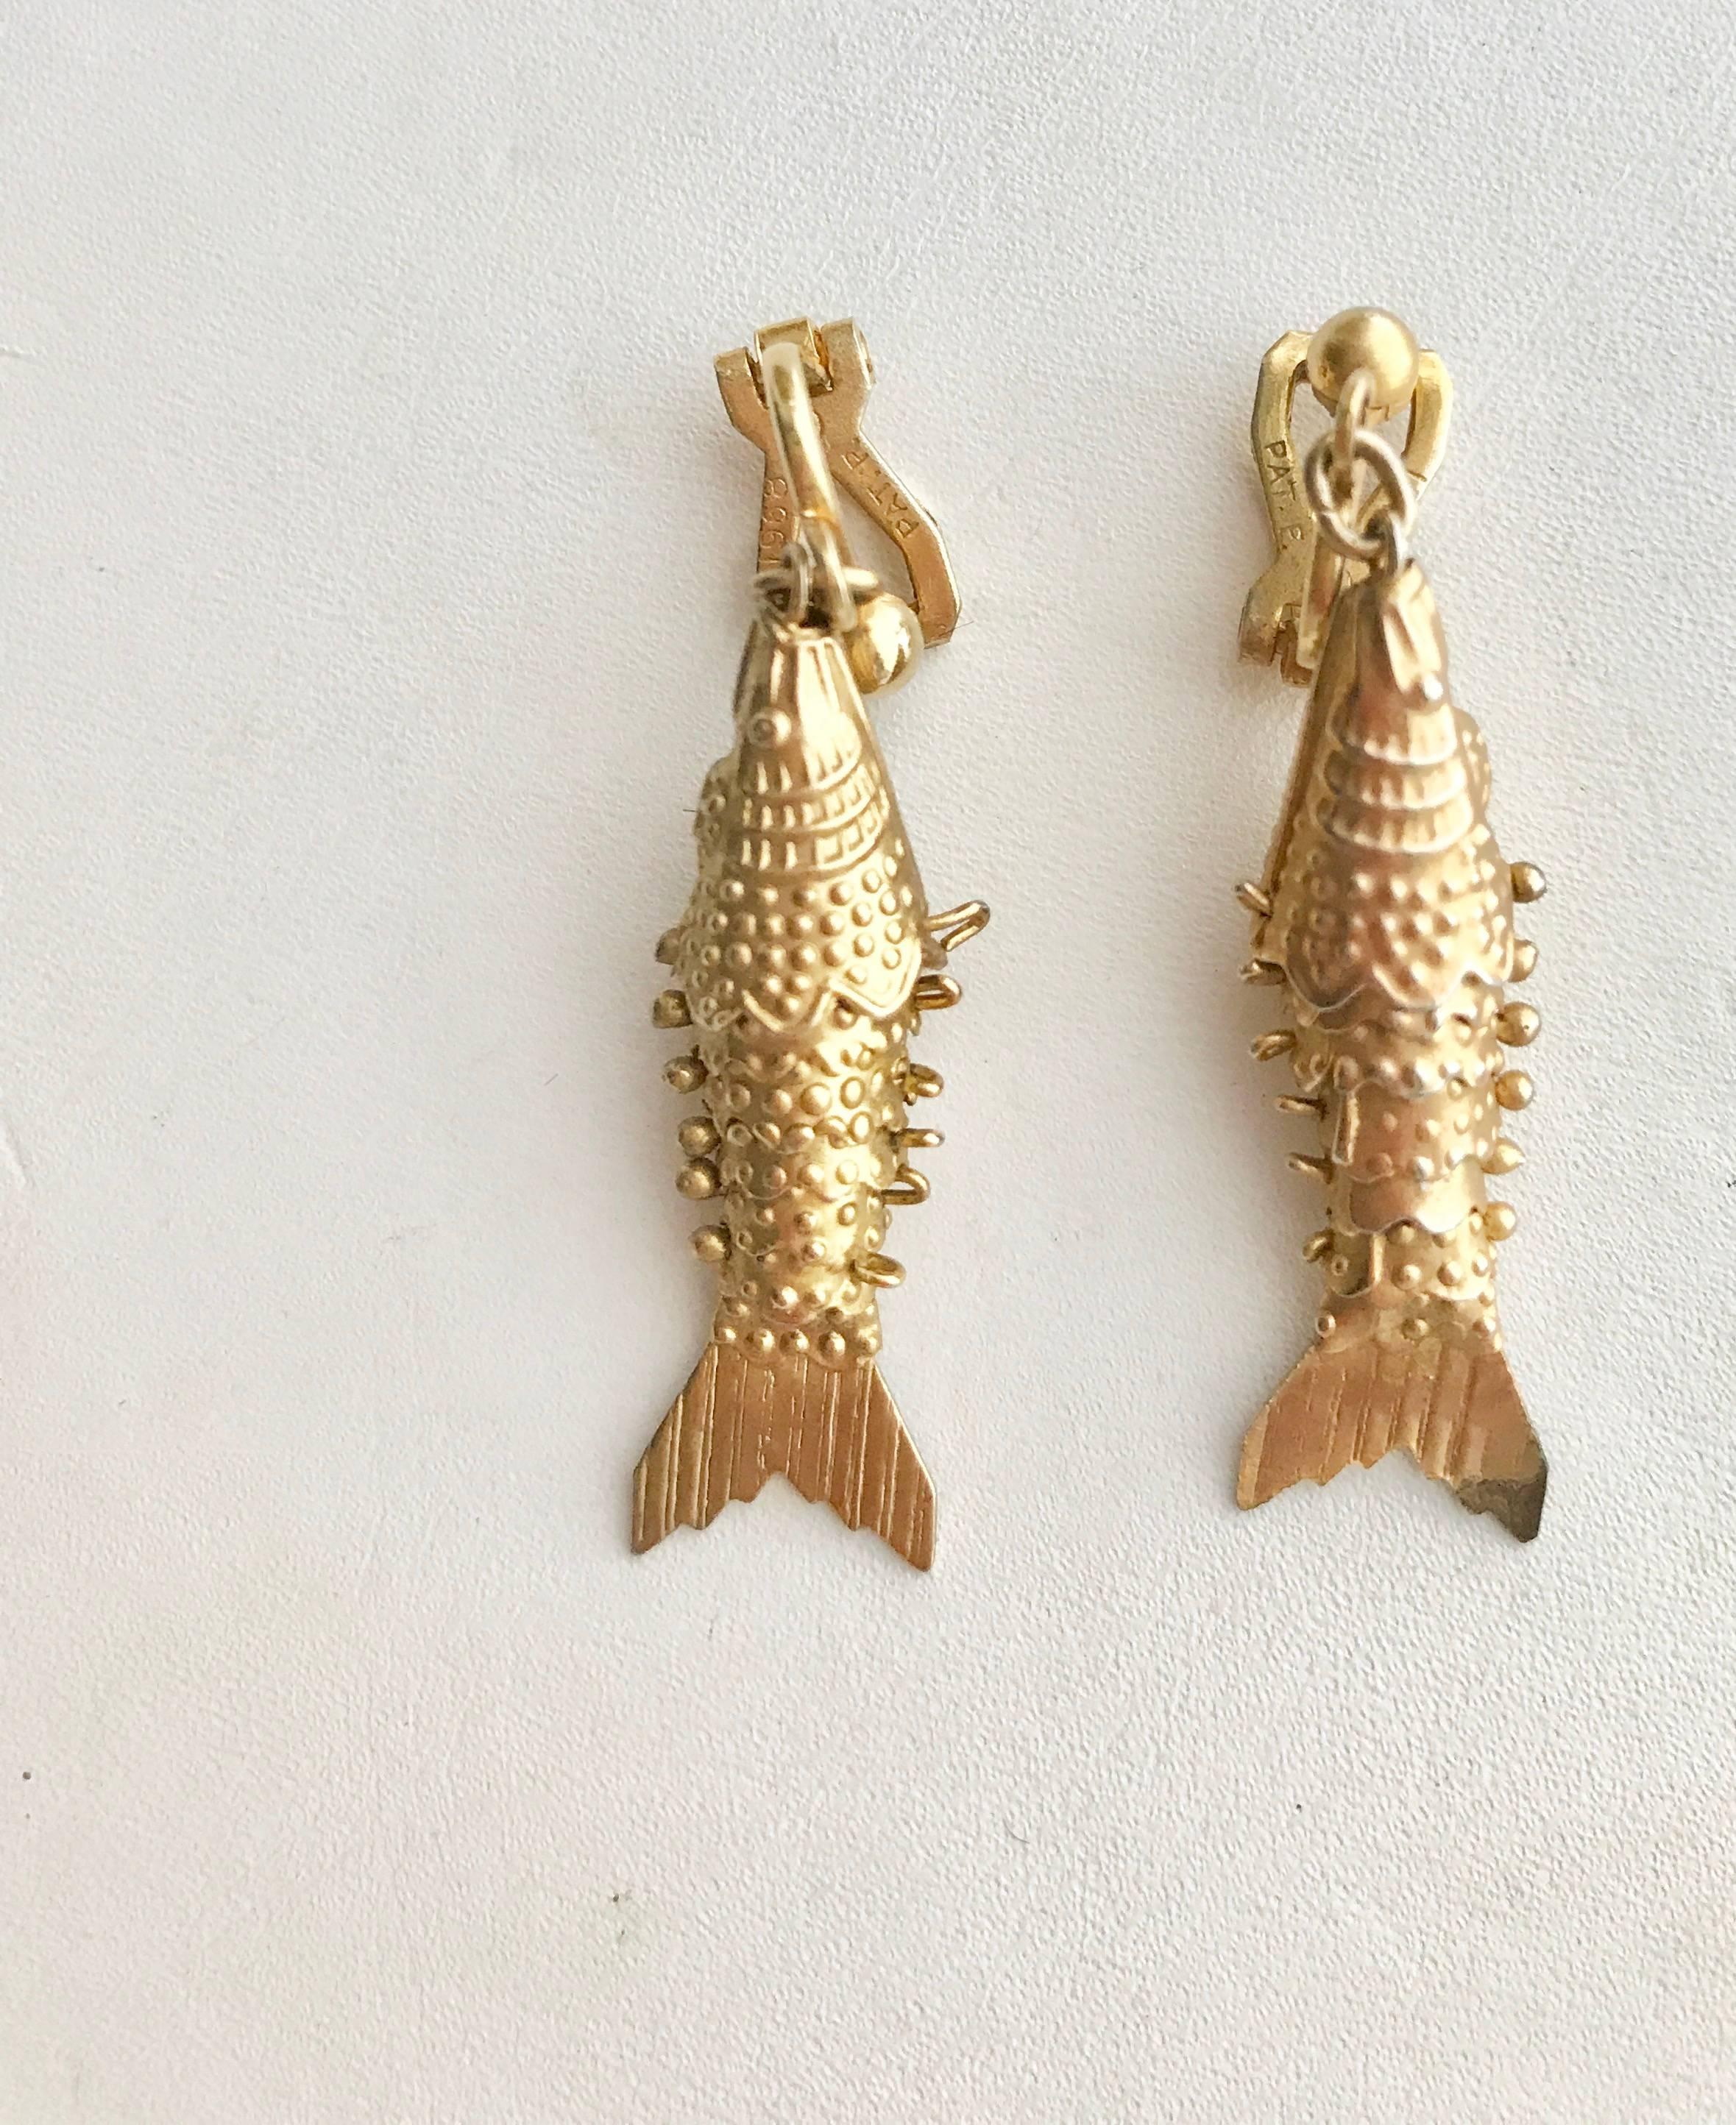 real fish necklace